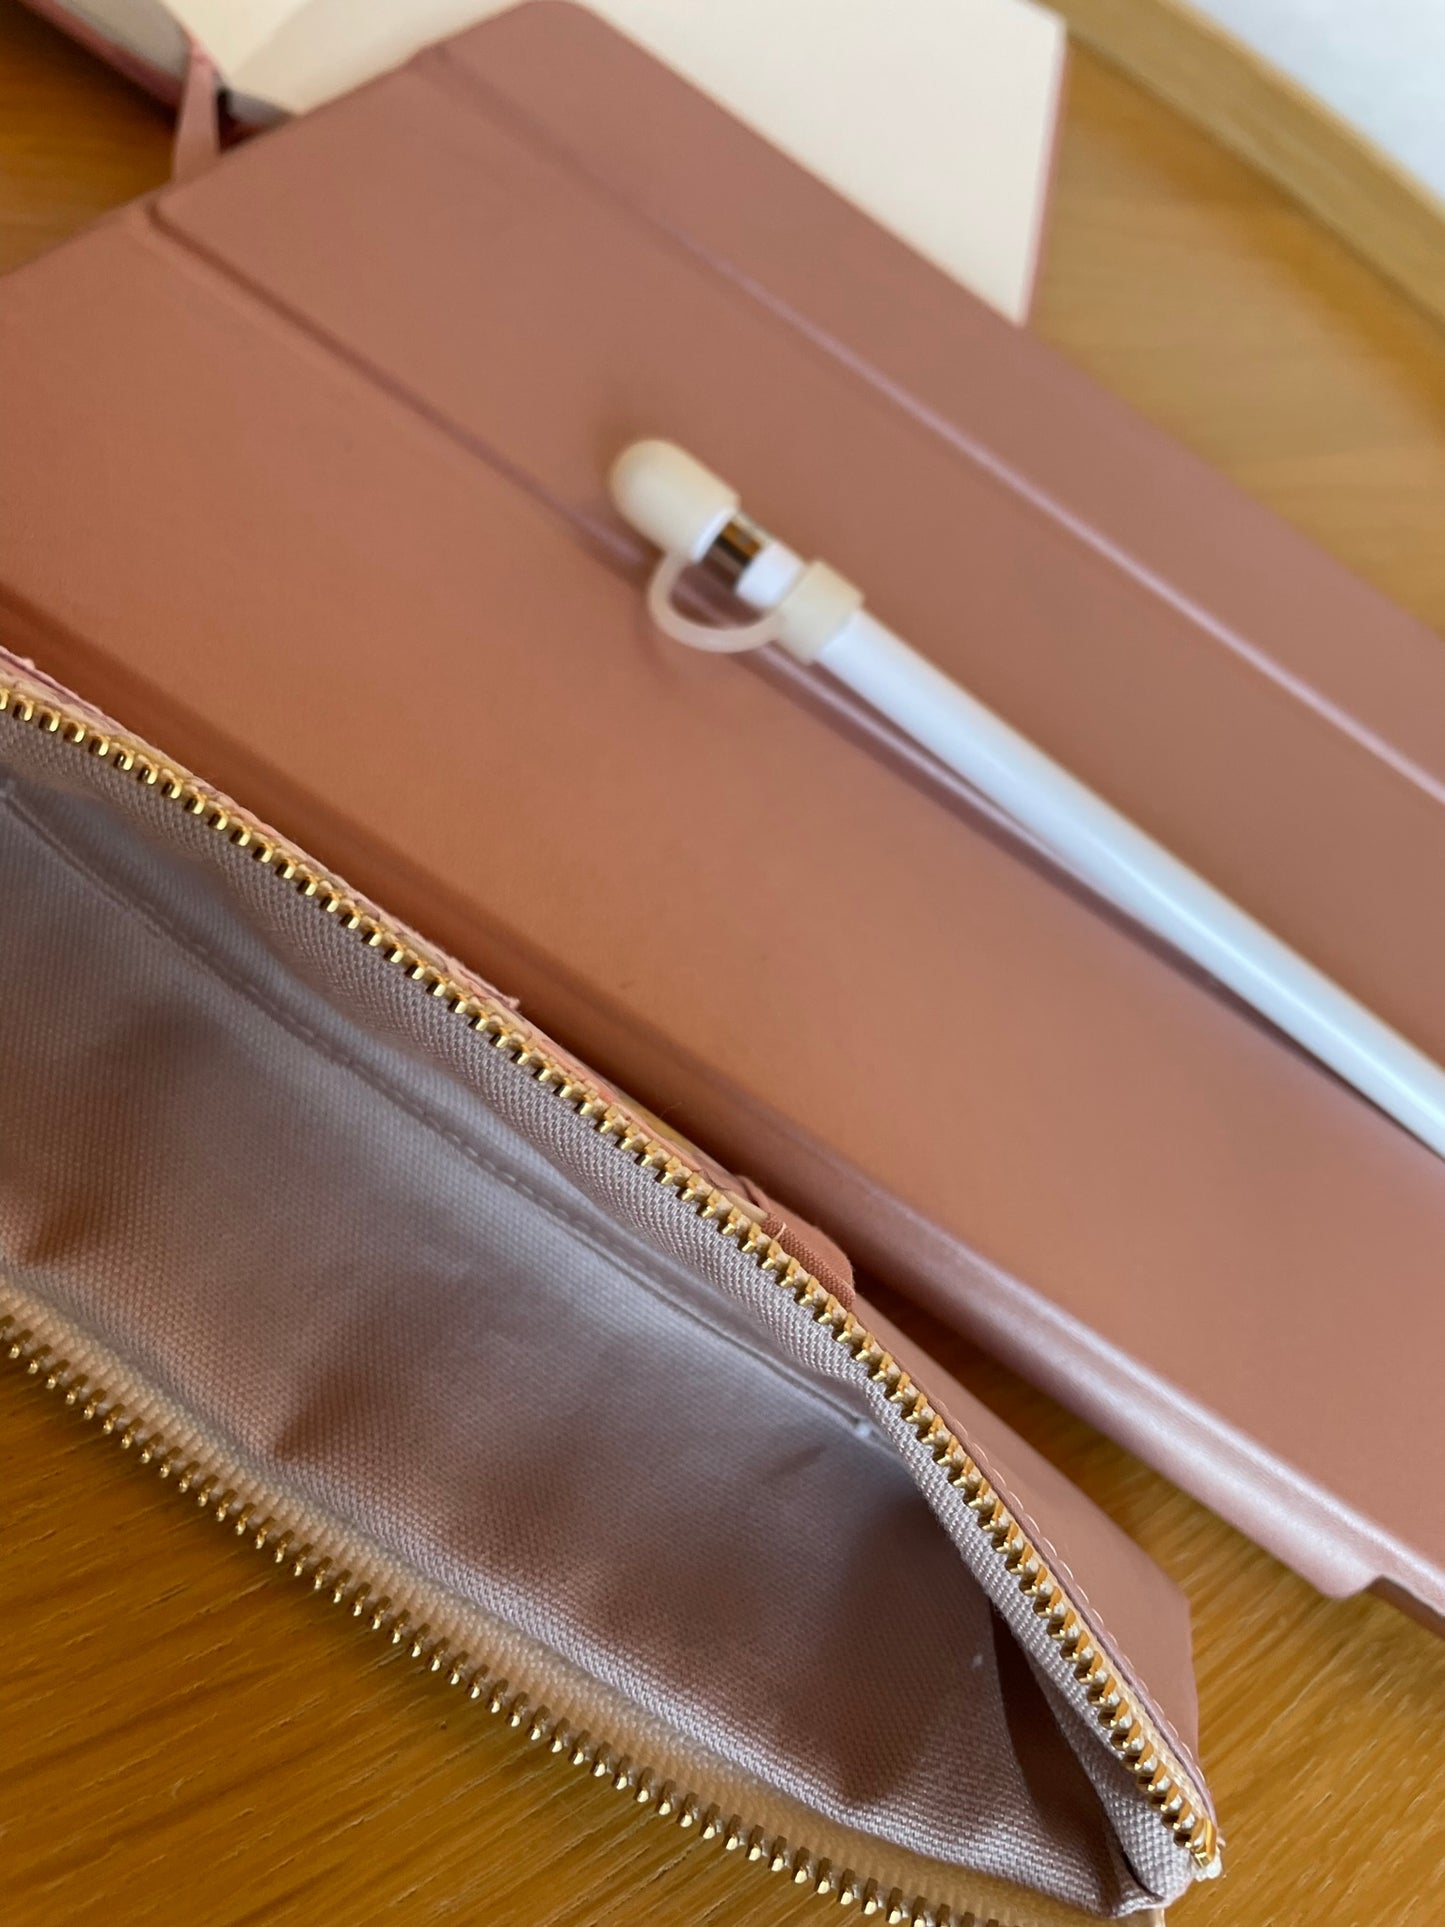 ipad pen case+ plus <Water repellent > Small Betsy